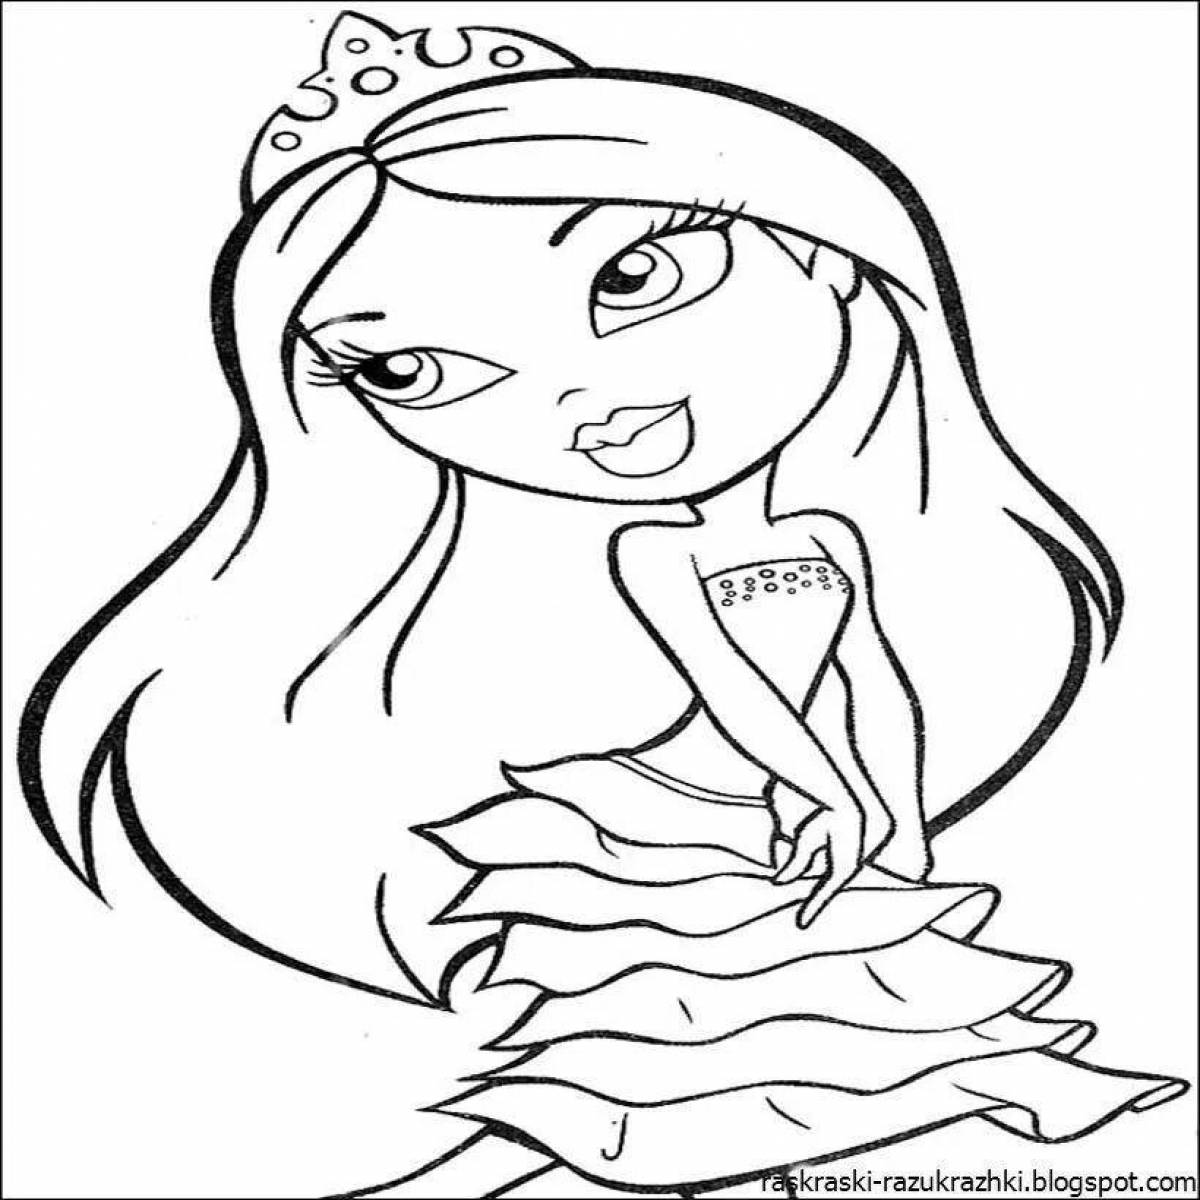 Dazzling coloring book for girls 9-10 years old